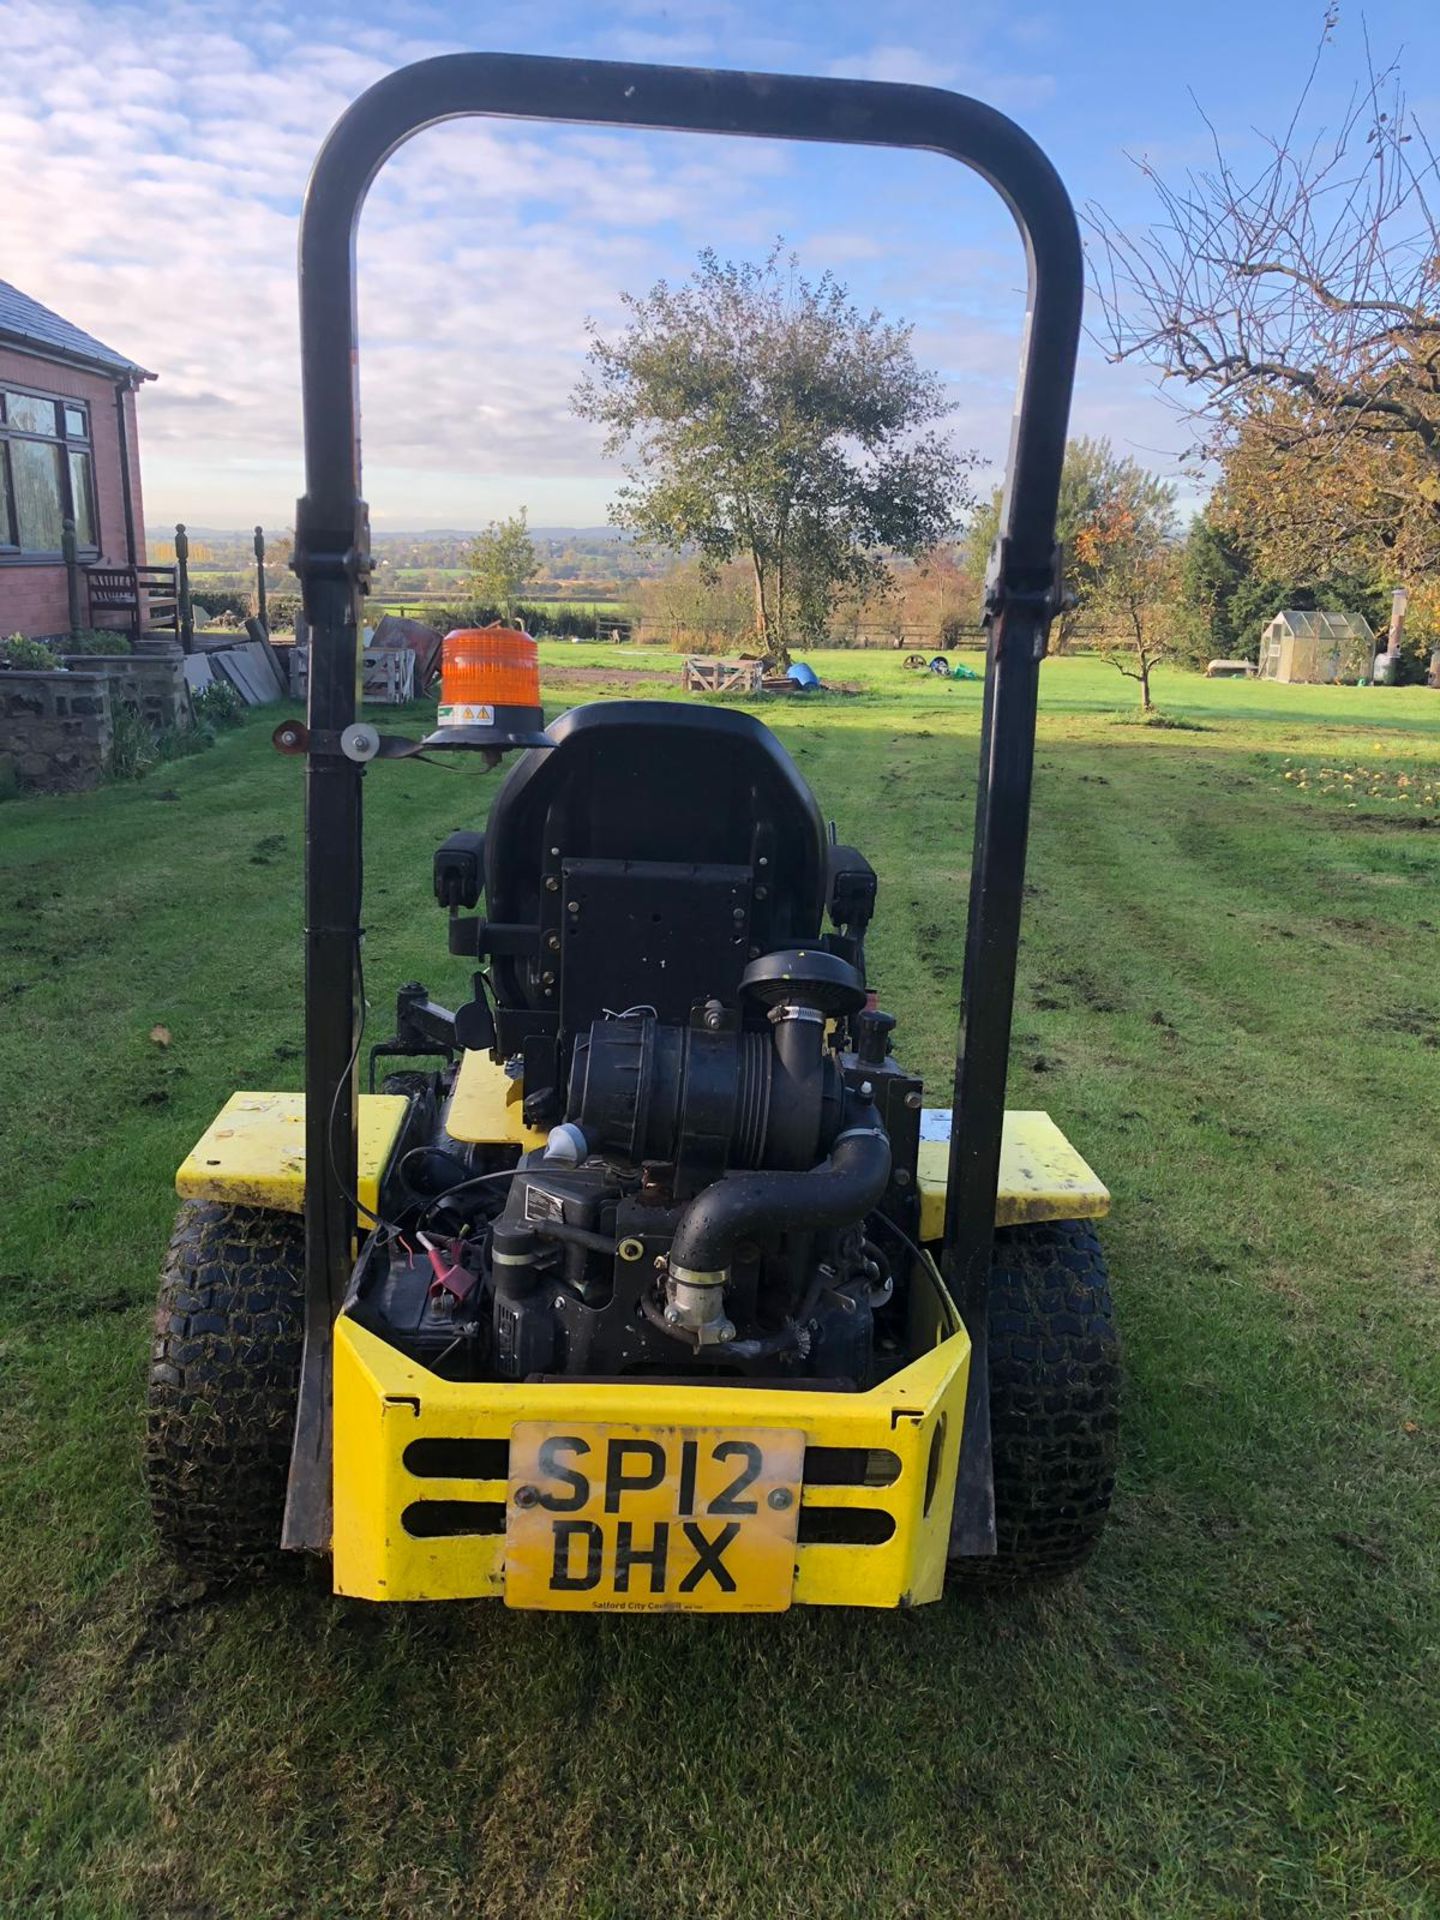 2012/12 REG GREAT DANE BRUTUS RIDE ON PETROL LAWN MOWER WITH DELUXE SEAT AND ROLL BAR *PLUS VAT* - Image 7 of 16